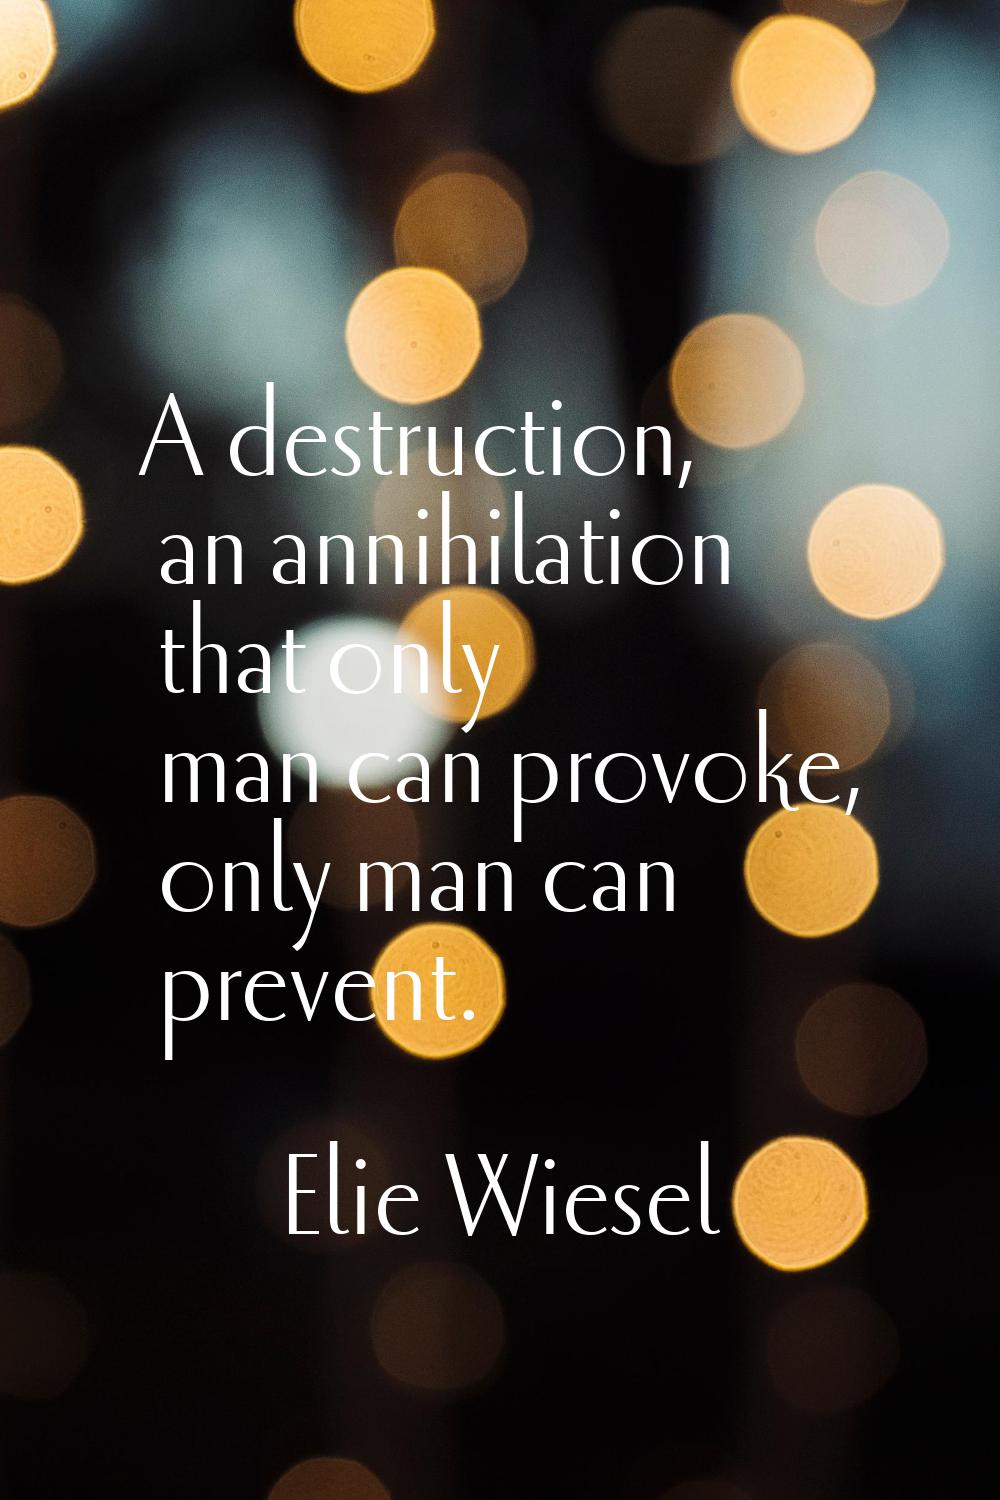 A destruction, an annihilation that only man can provoke, only man can prevent.